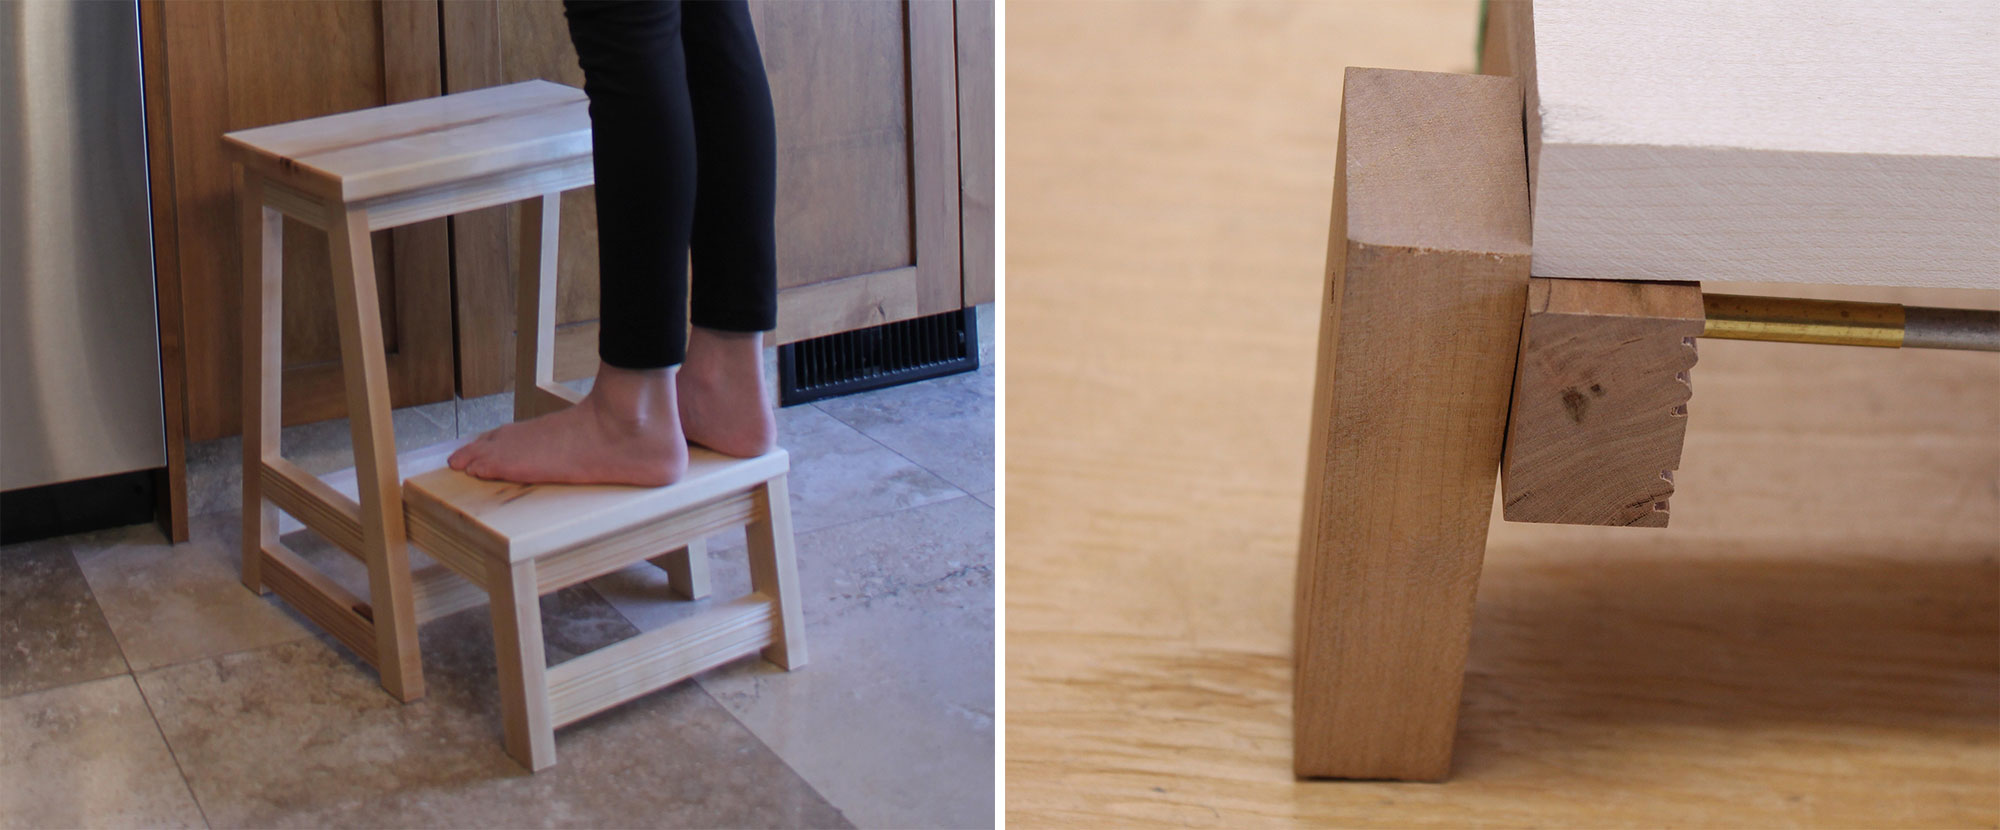 Left: A young girl standing on a stool with a hinged step. Right: The pin-hinge system for the stool was stress-tested using a mock-up.